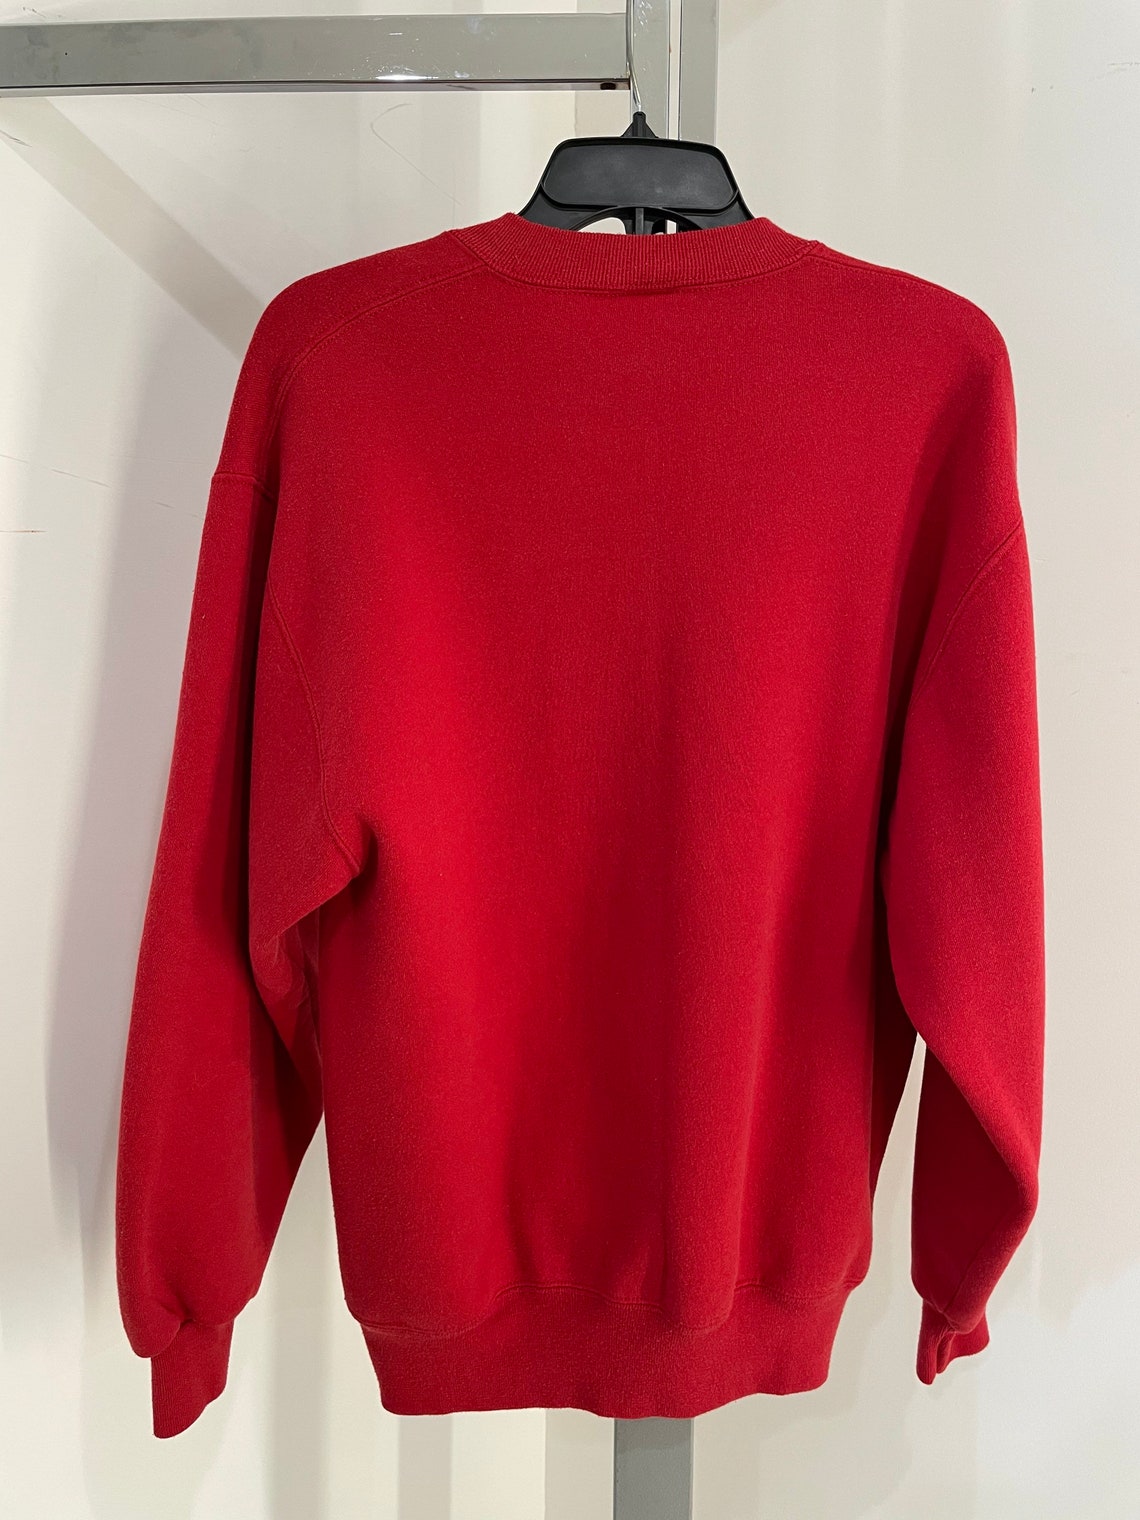 90s Russell red crewneck / M | Etsy